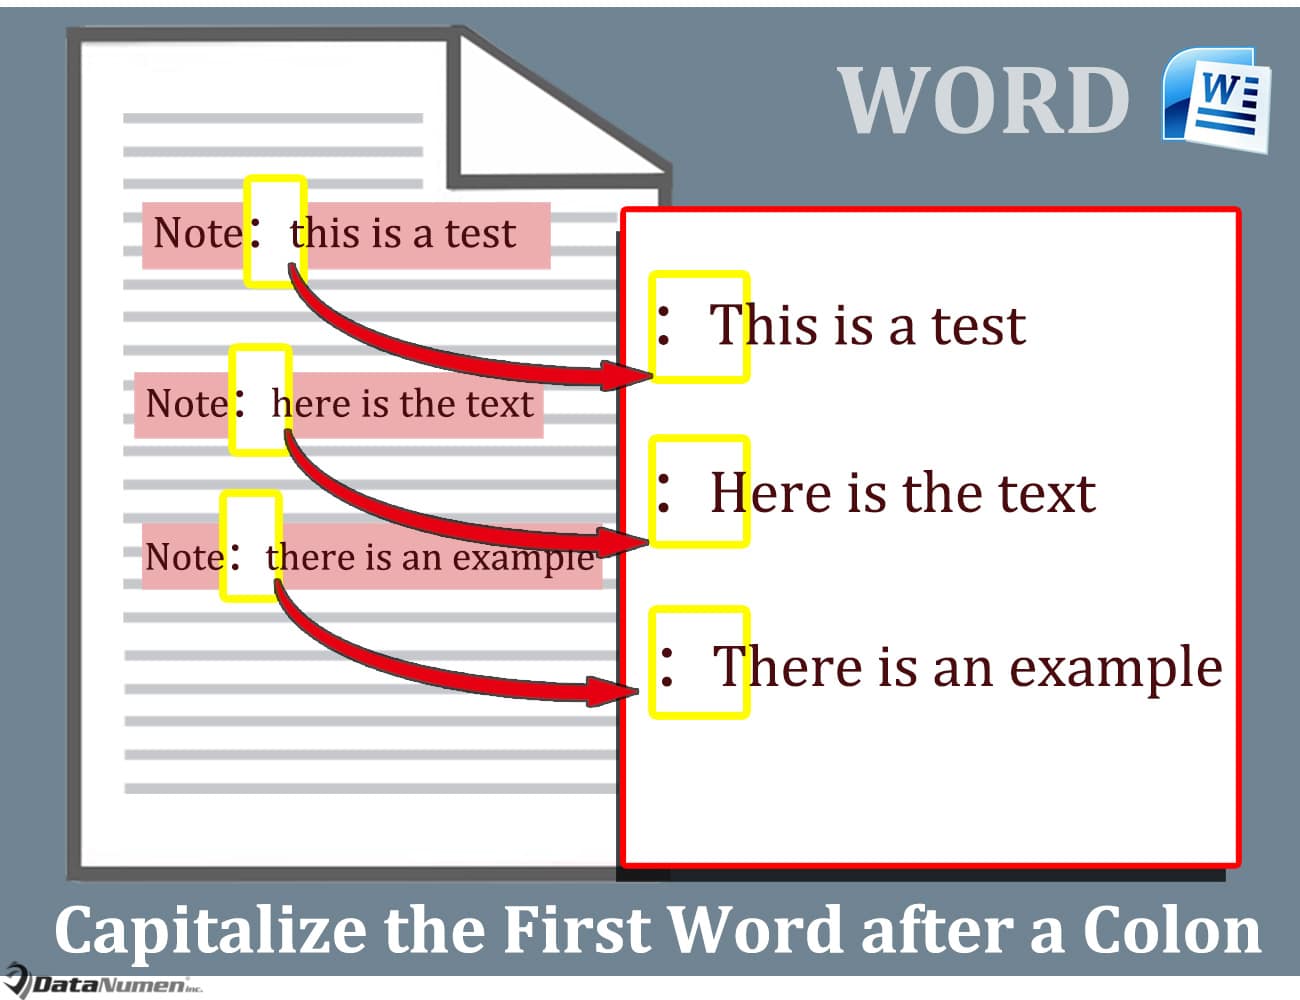 Capitalize the First Word after a Colon in Your Word Document